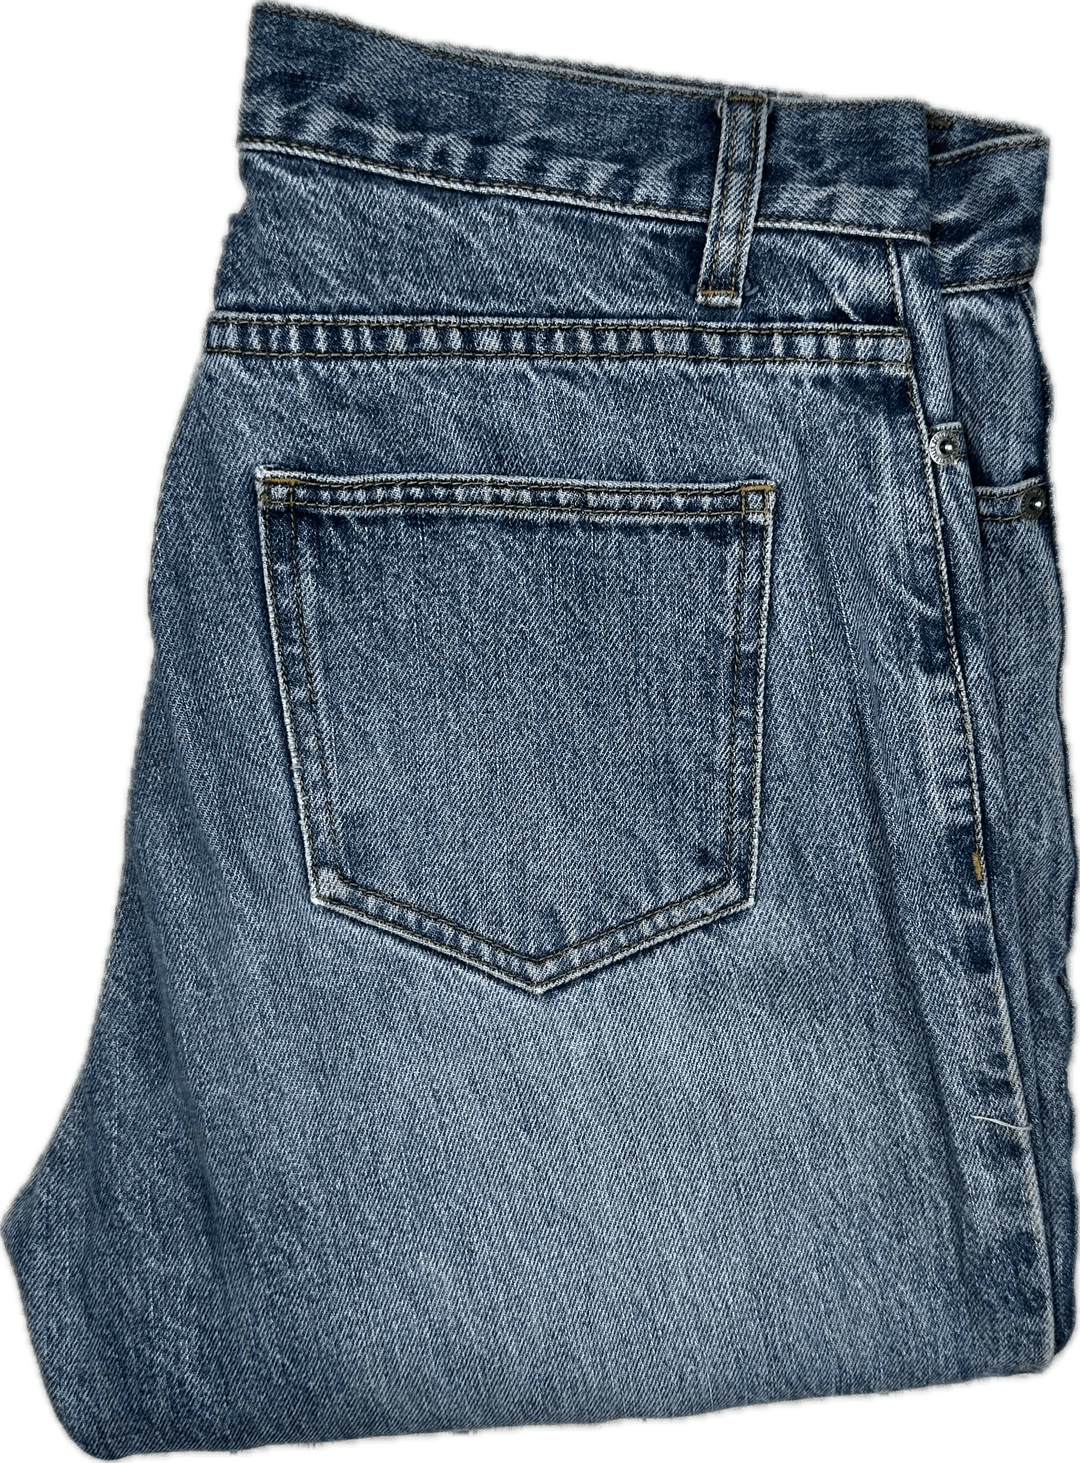 Country Road Vintage 1990's Straight Jeans- Size 12 - Jean Pool